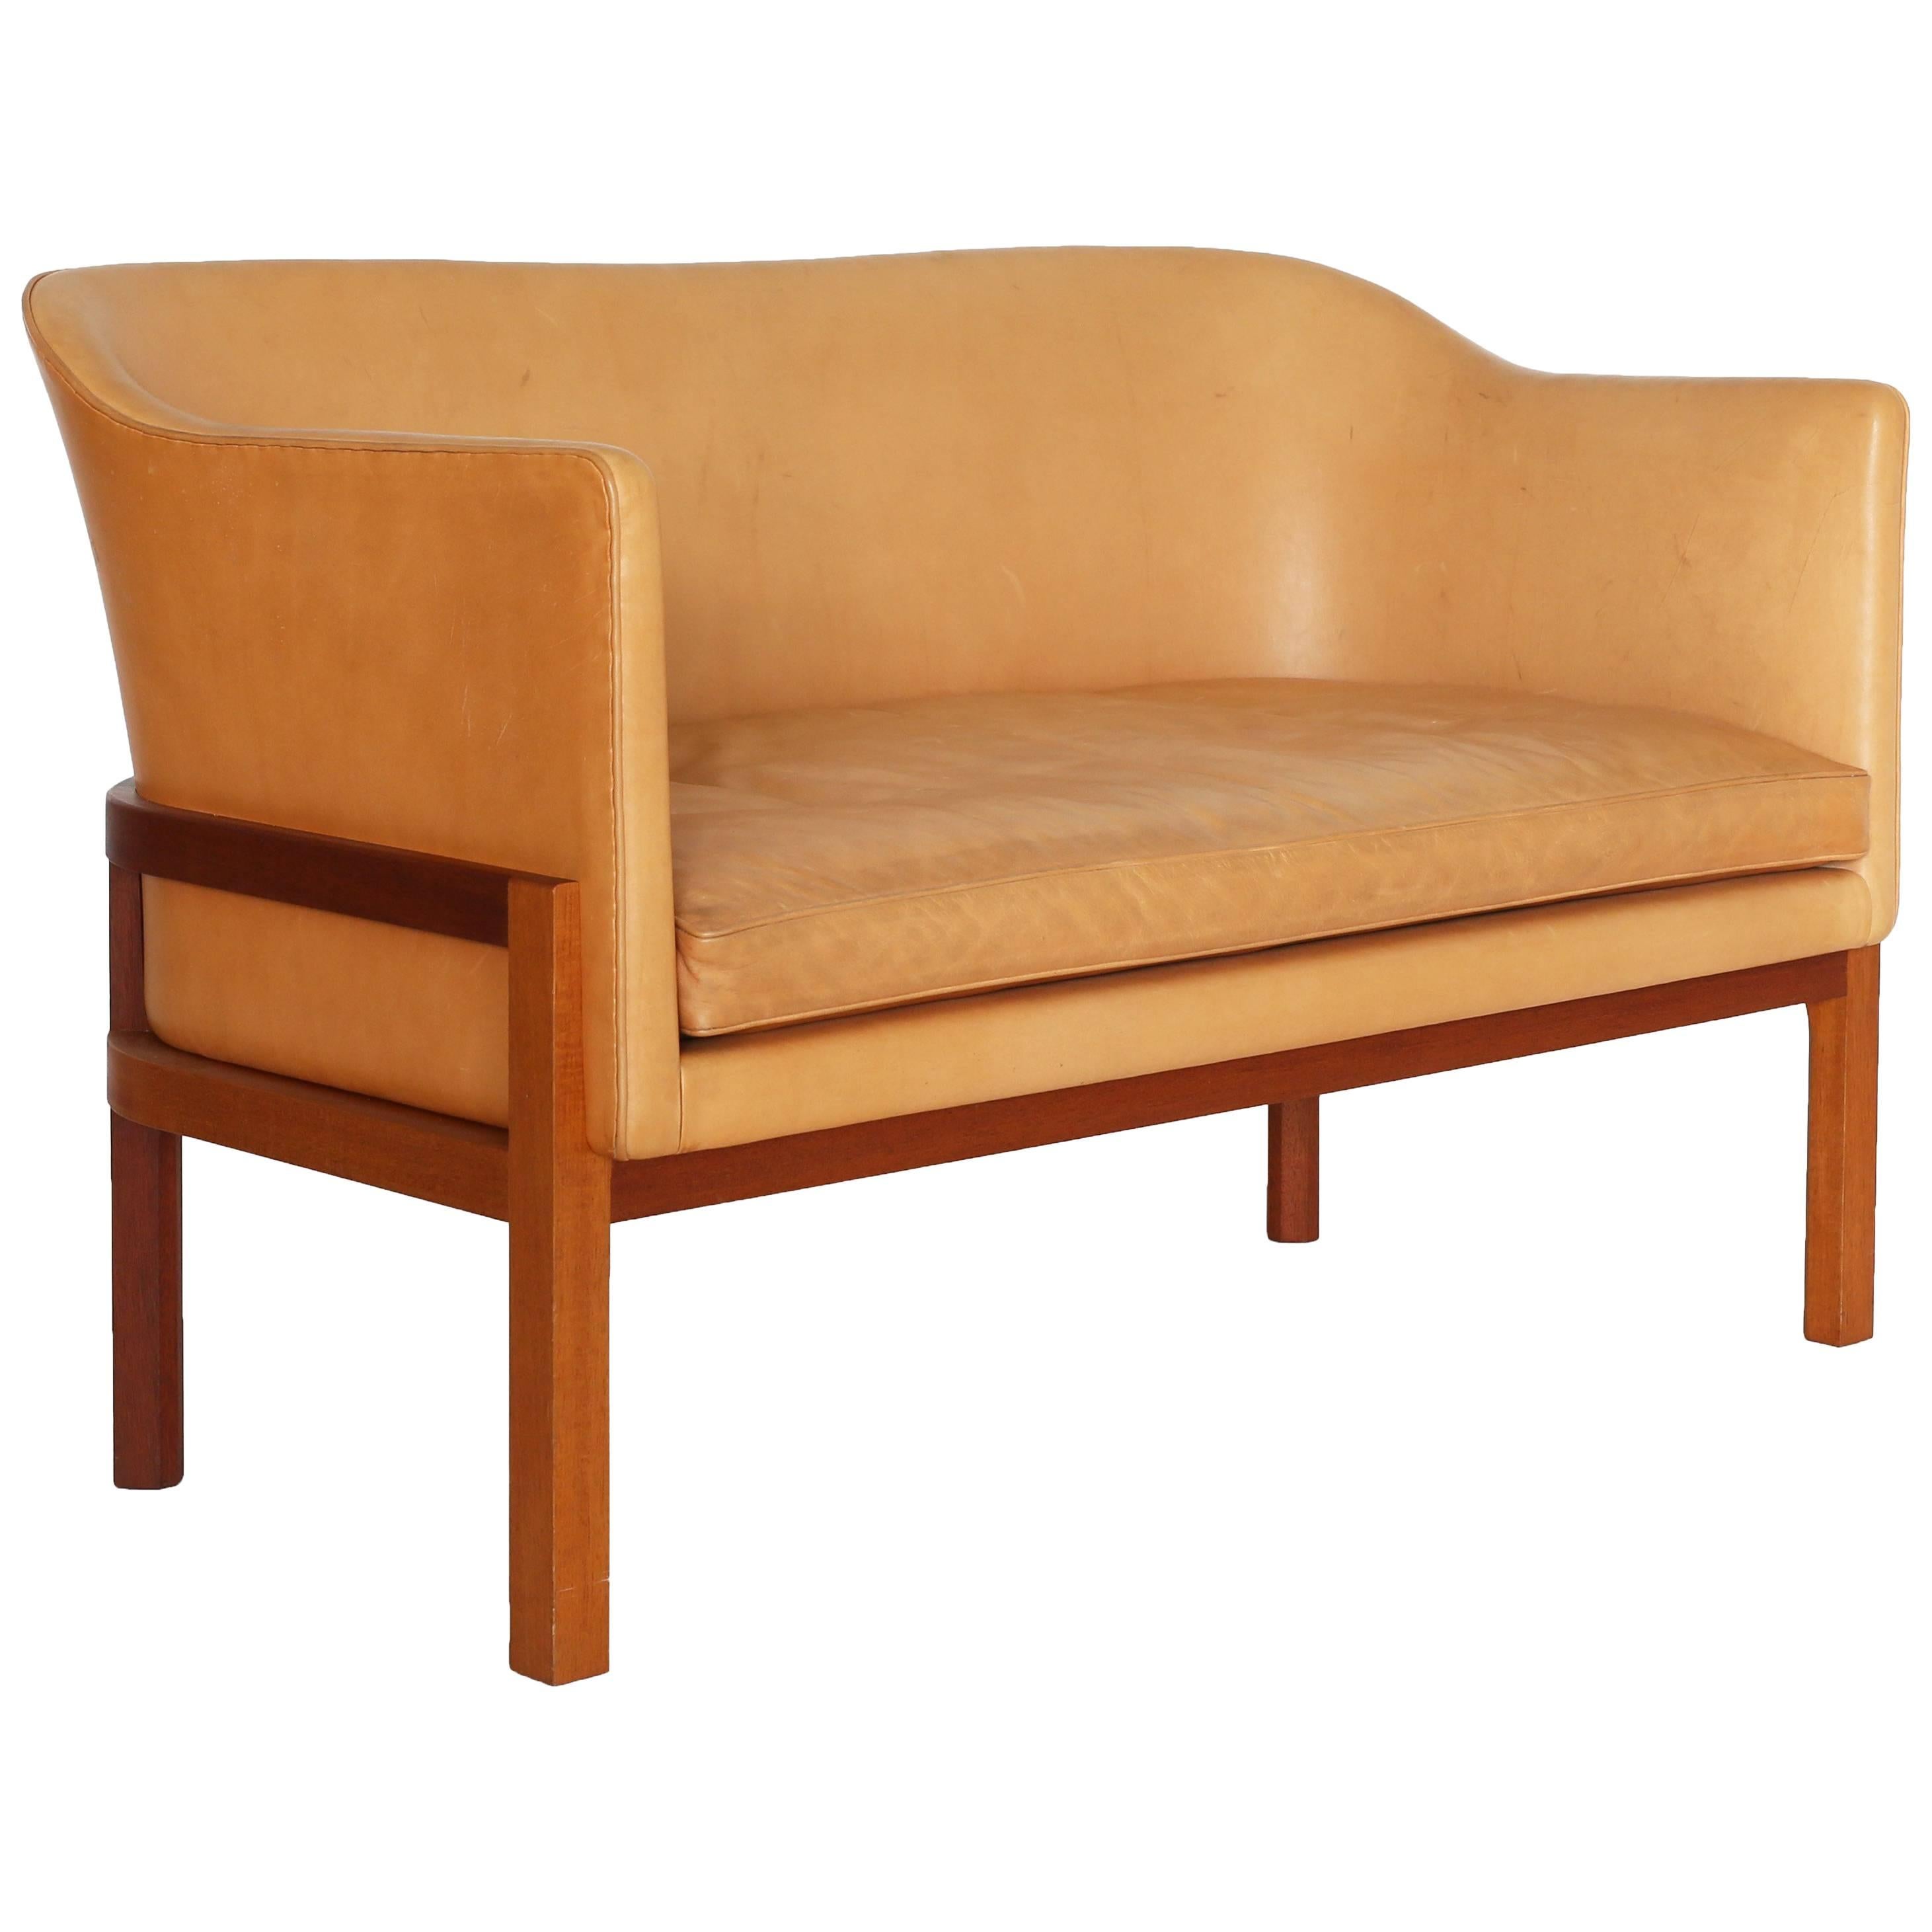 Mogens Koch Sofa in Mahogany and Leather for Rud. Rasmussen